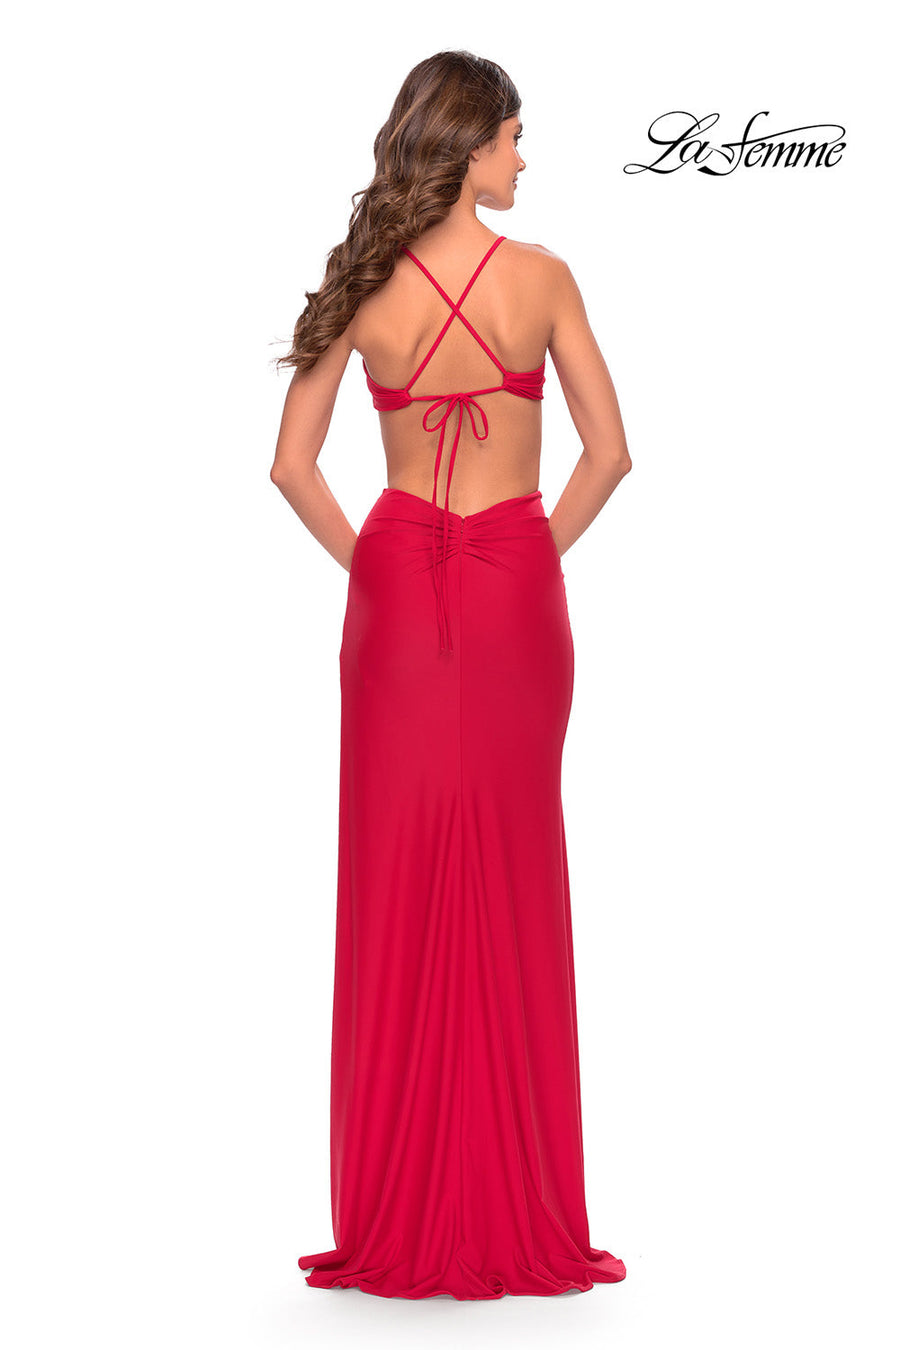 La Femme 31292 prom dress images.  La Femme 31292 is available in these colors: Black, Red, Royal Blue.